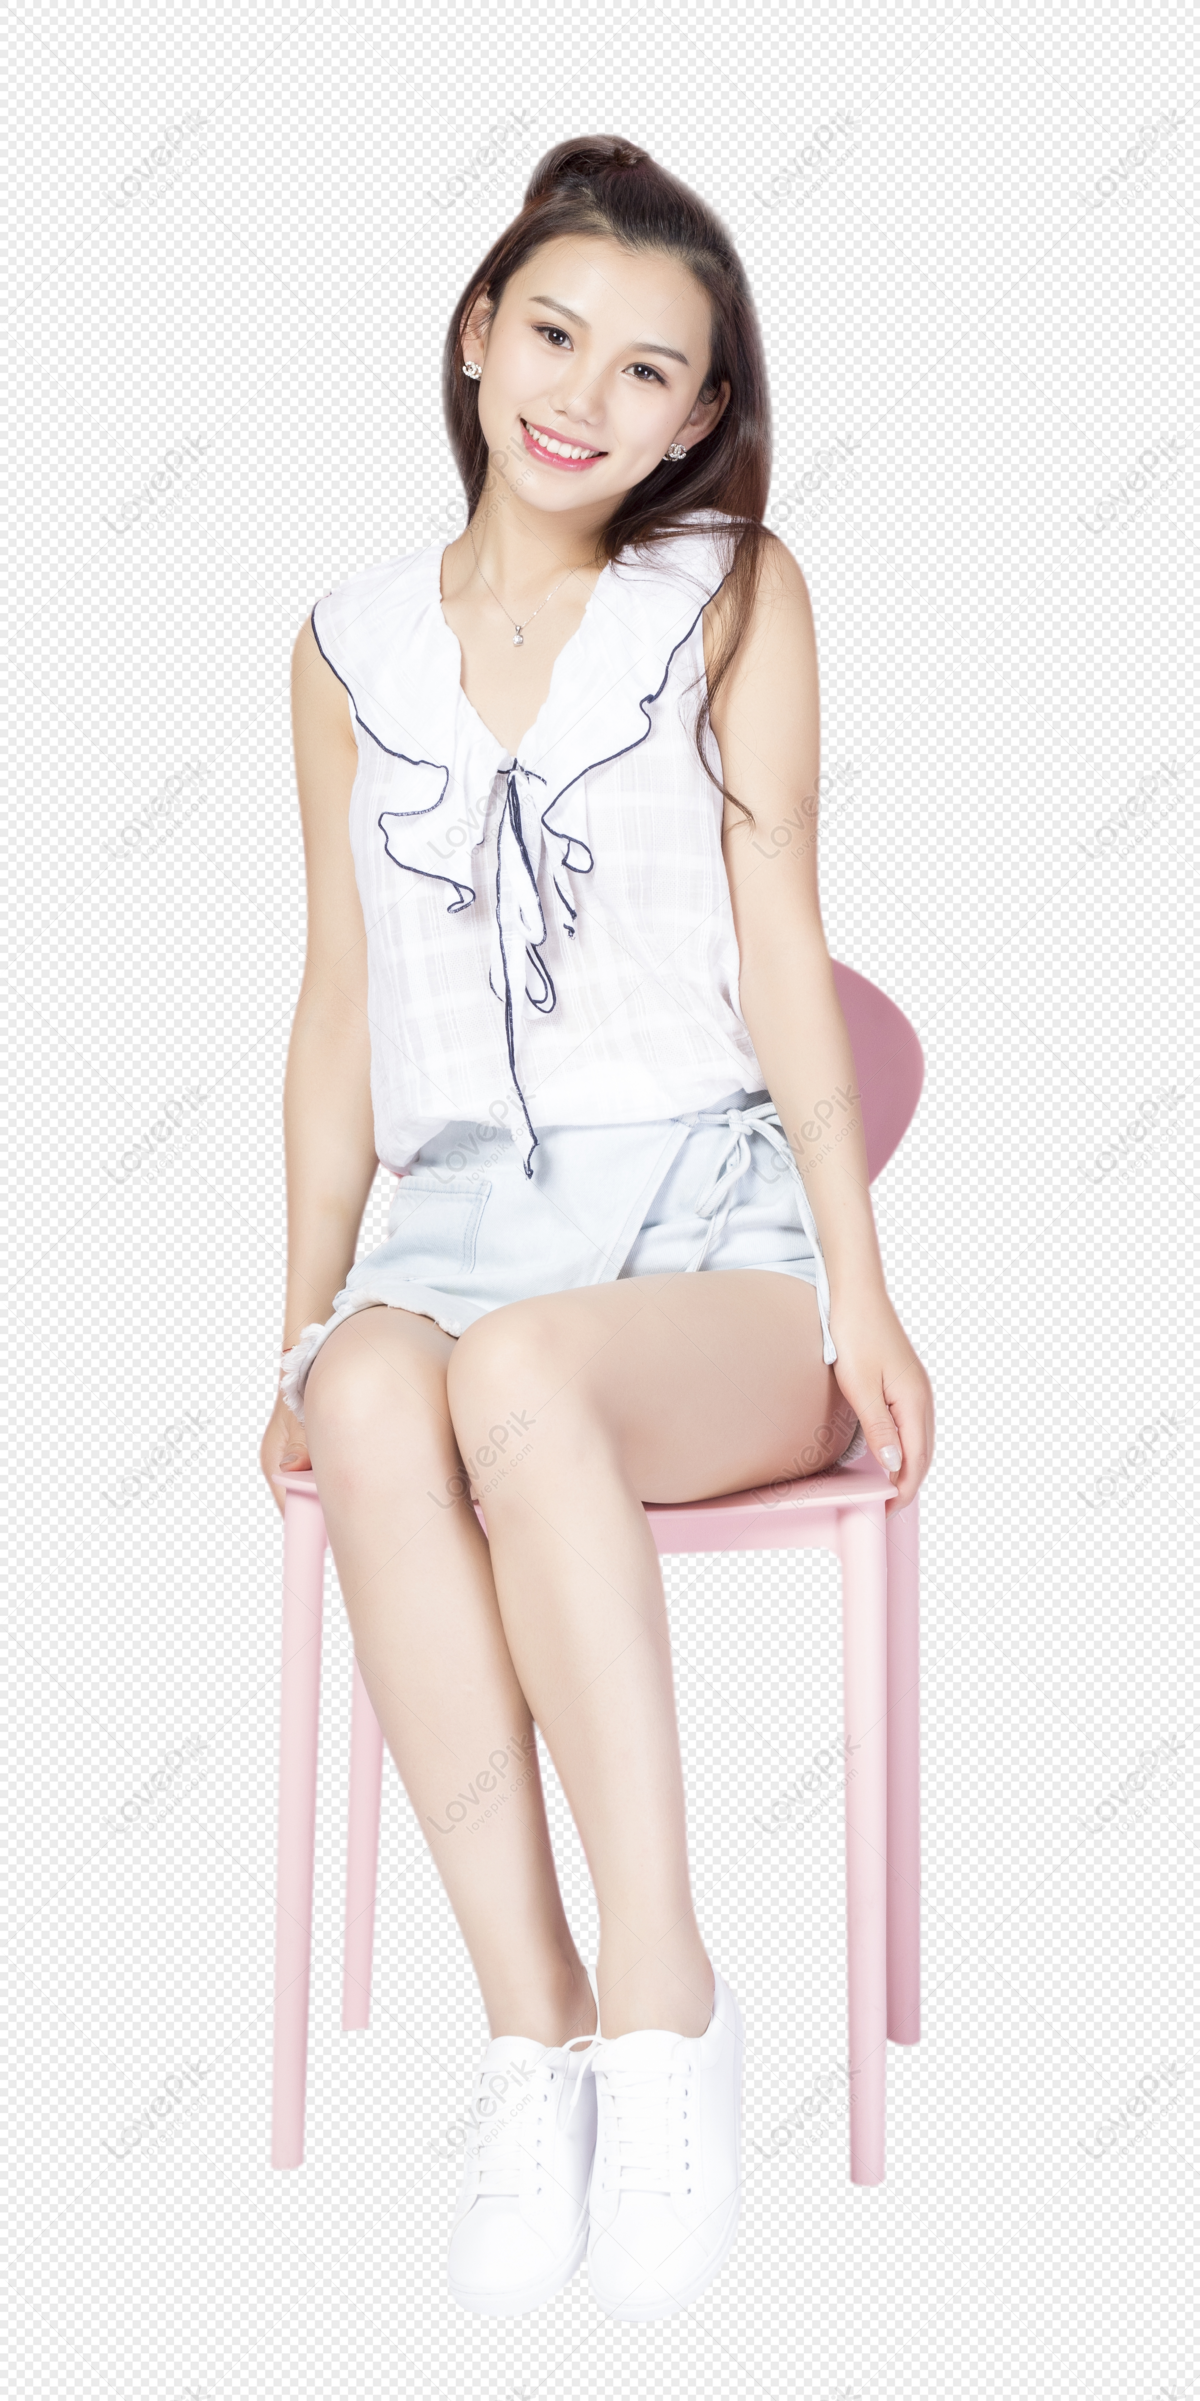 Sitting Young Women PNG Image Free Download And Clipart Image For Free ...